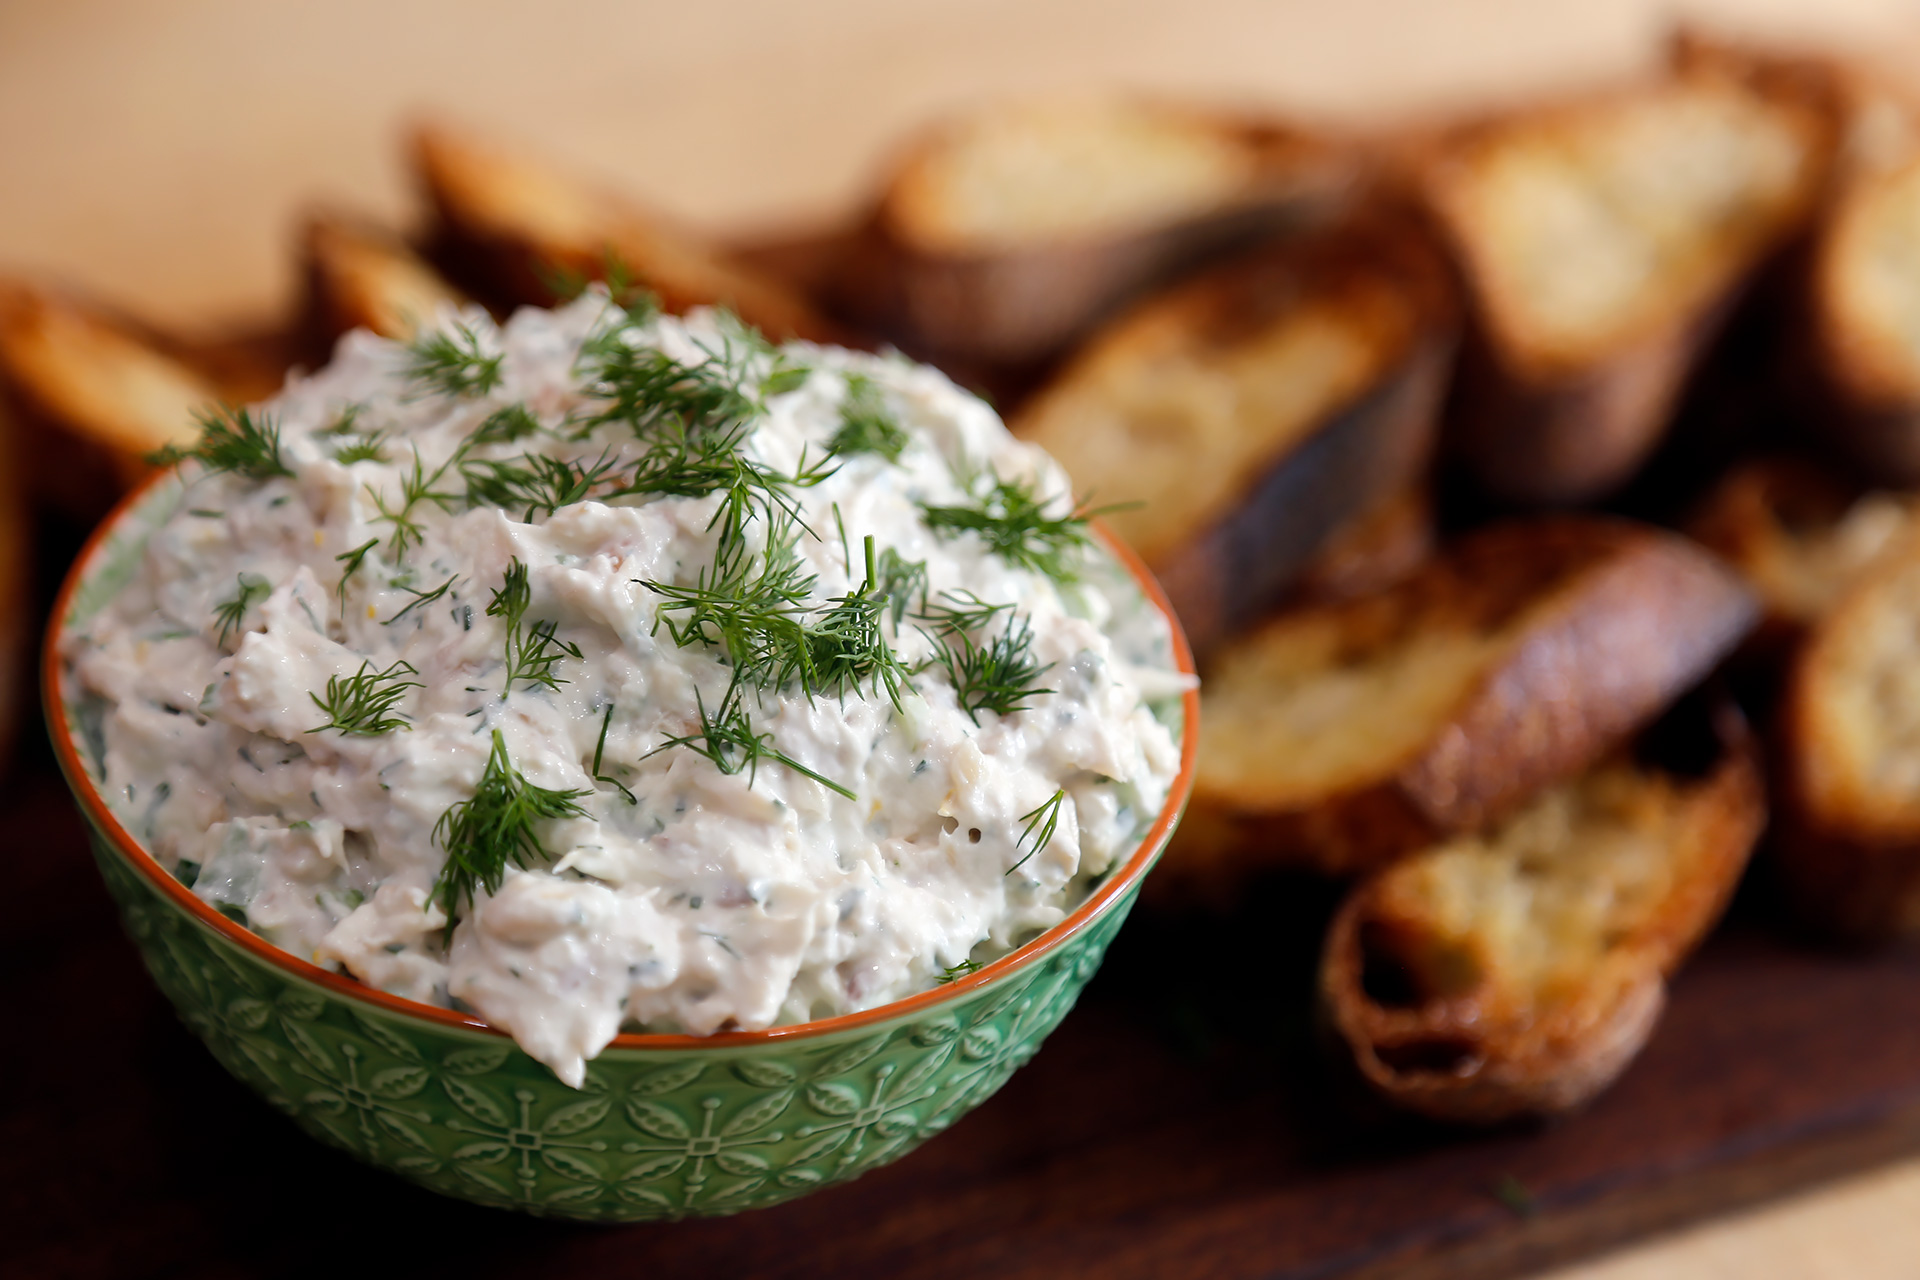 Smoked Trout-Herb Dip with Crostini